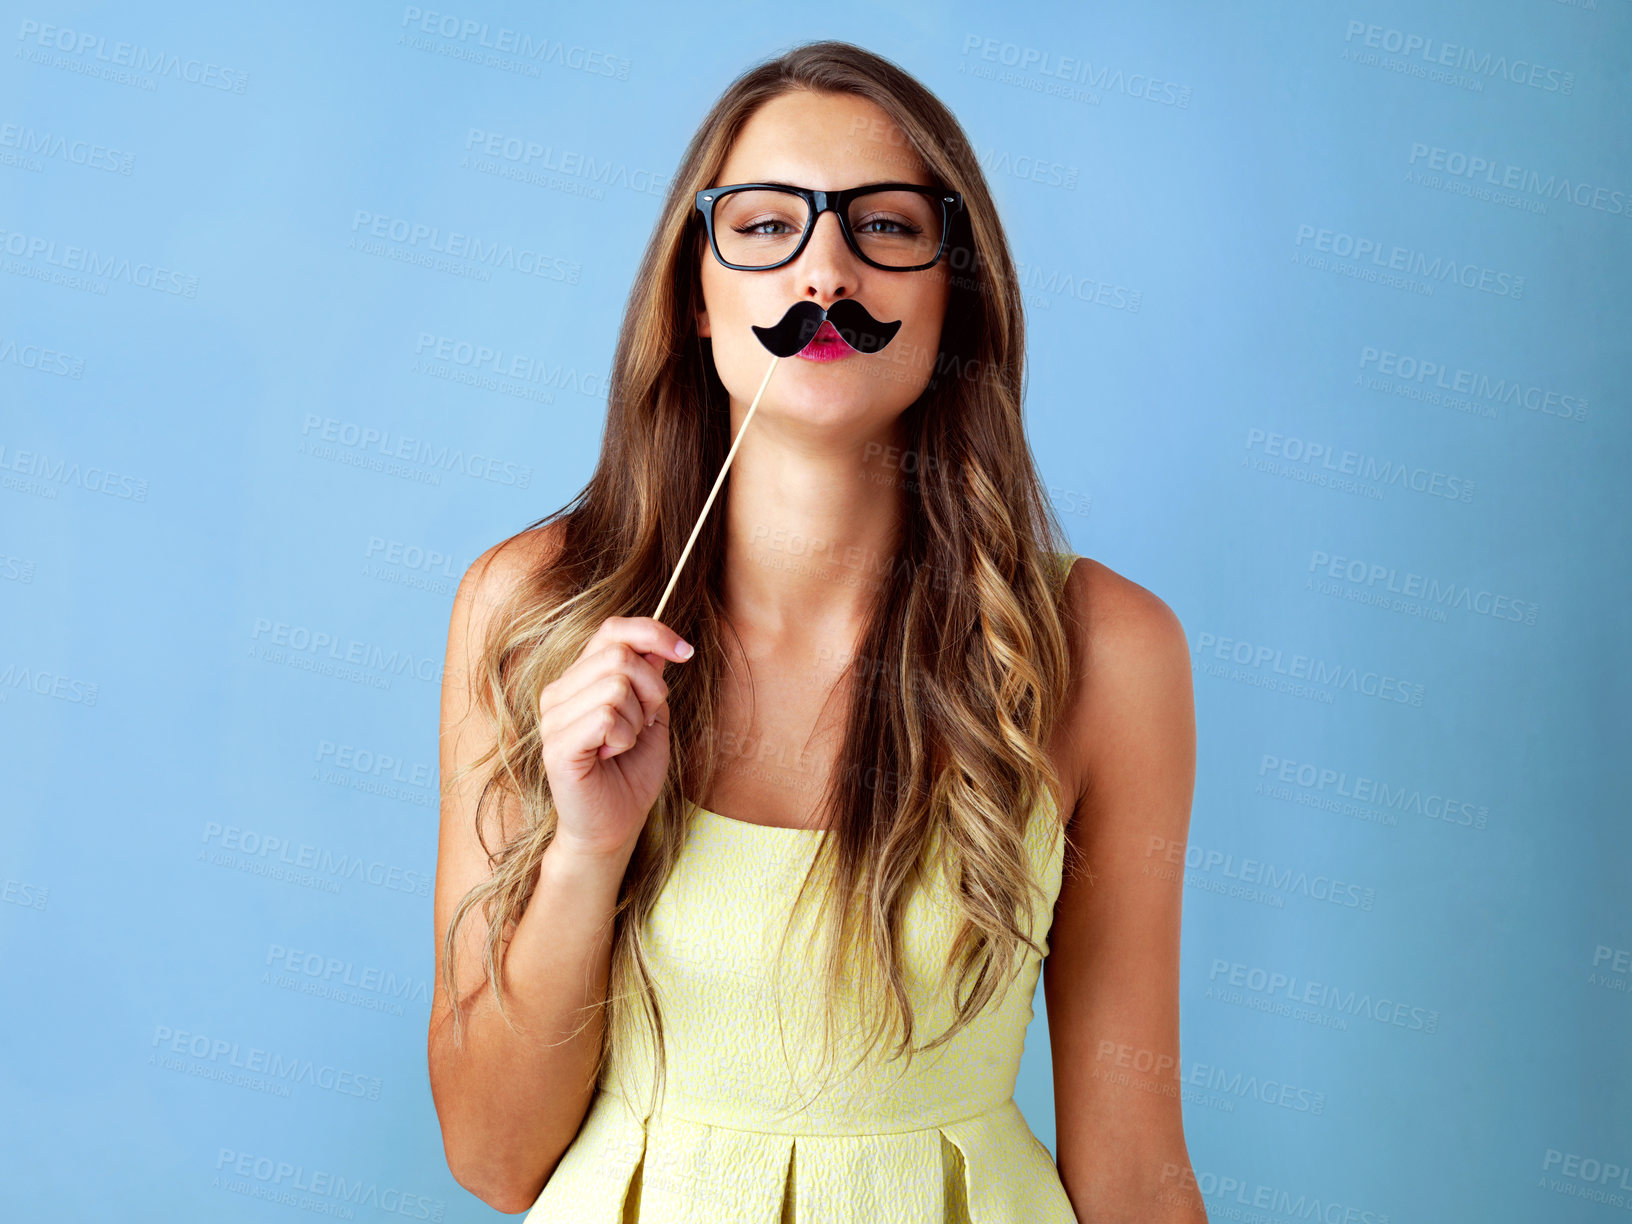 Buy stock photo Studio shot of a young woman holding a moustache prop to her face against a blue background